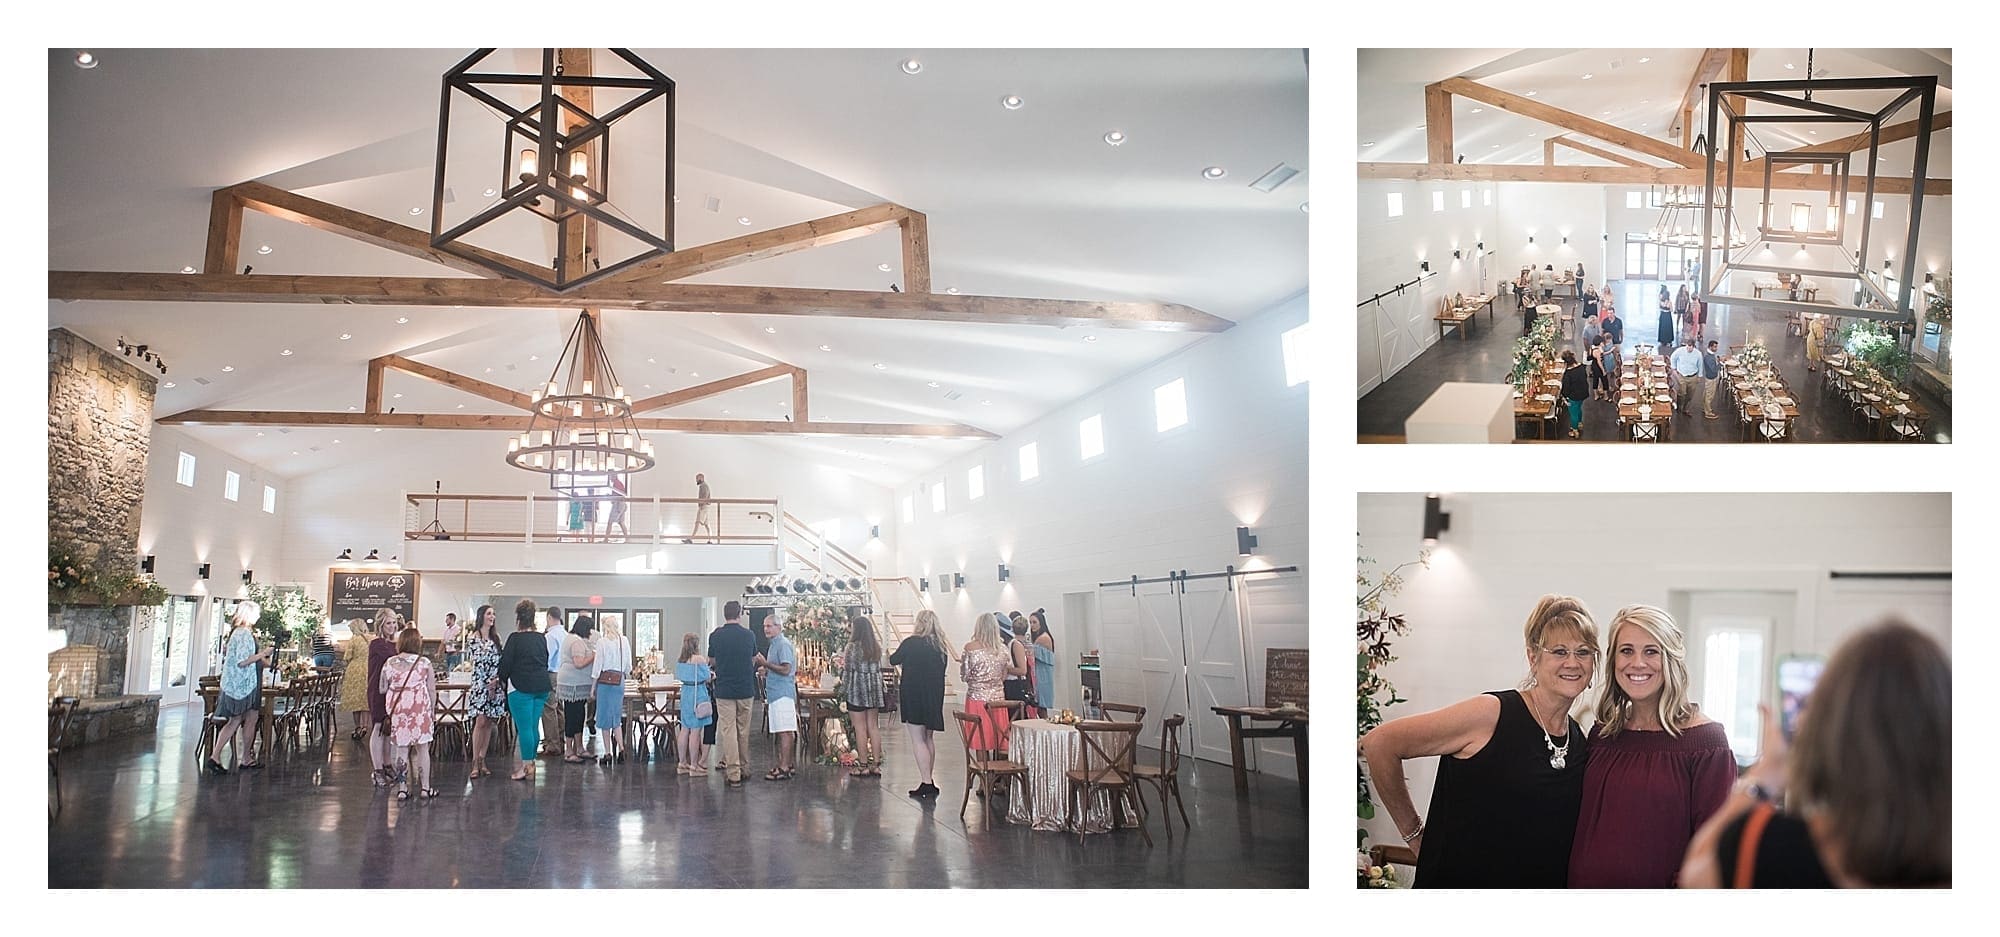 High ceilings and exposed wood beams at new wedding venue.